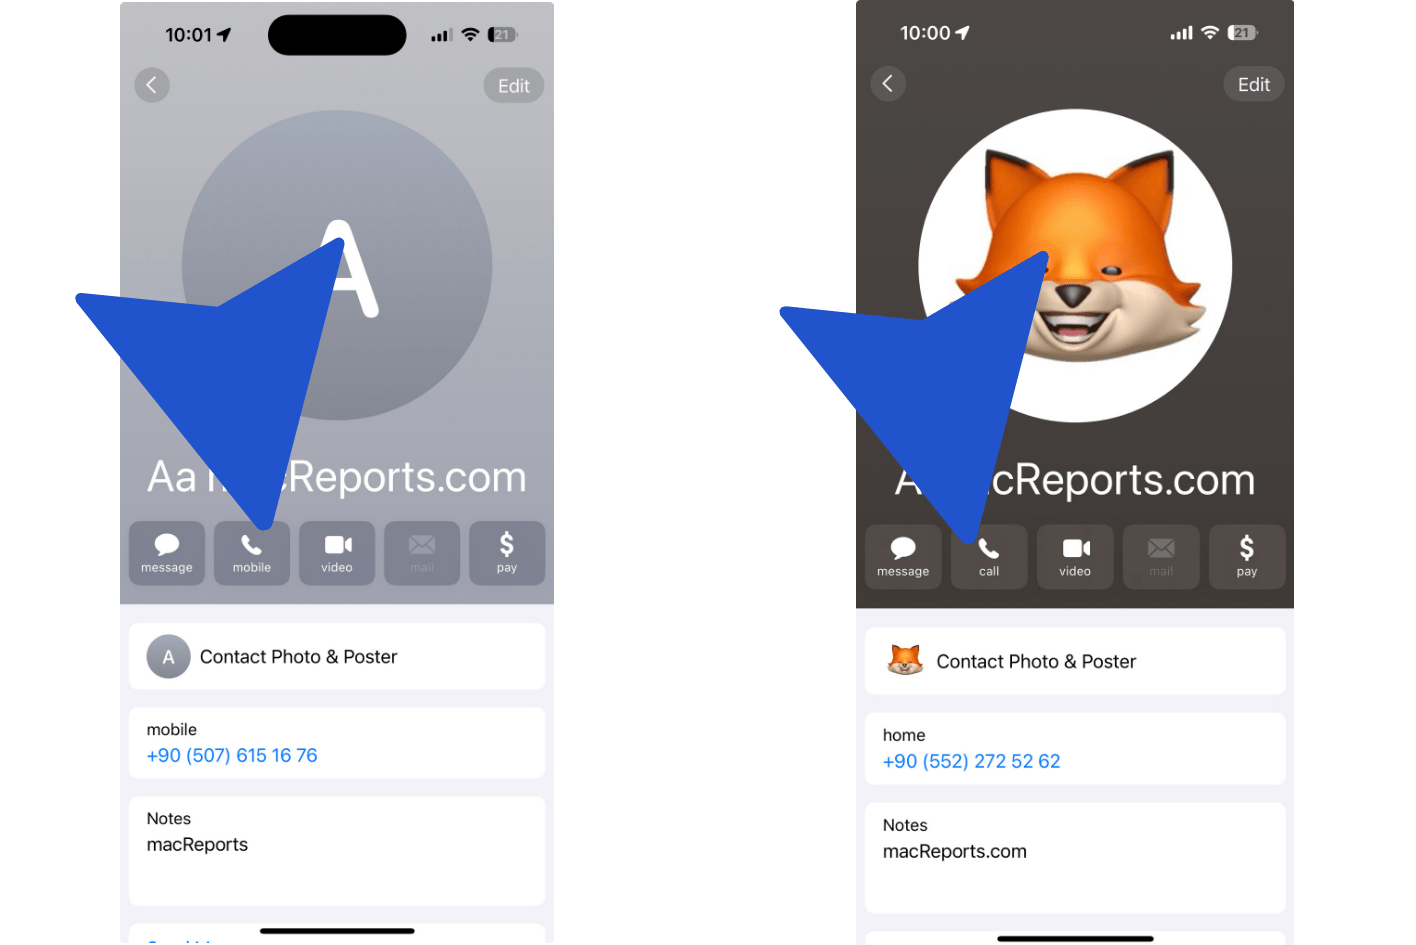 Call options in the Contacts app